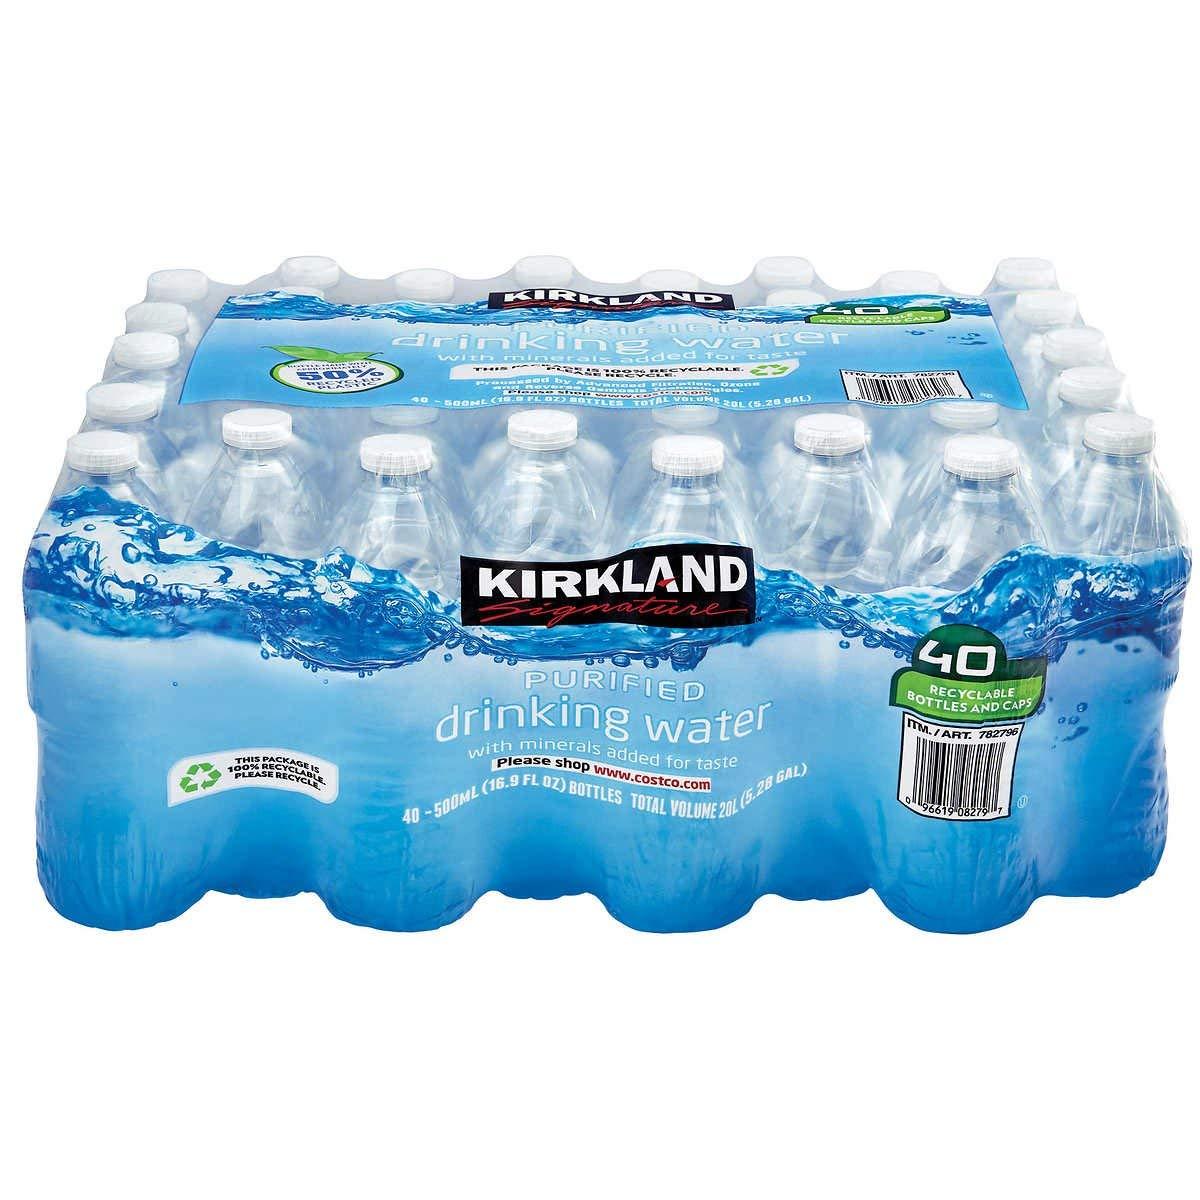 Kirkland Signature Purified Drinking Water, 16.9 Ounce, 40 Count - PACK OF 4